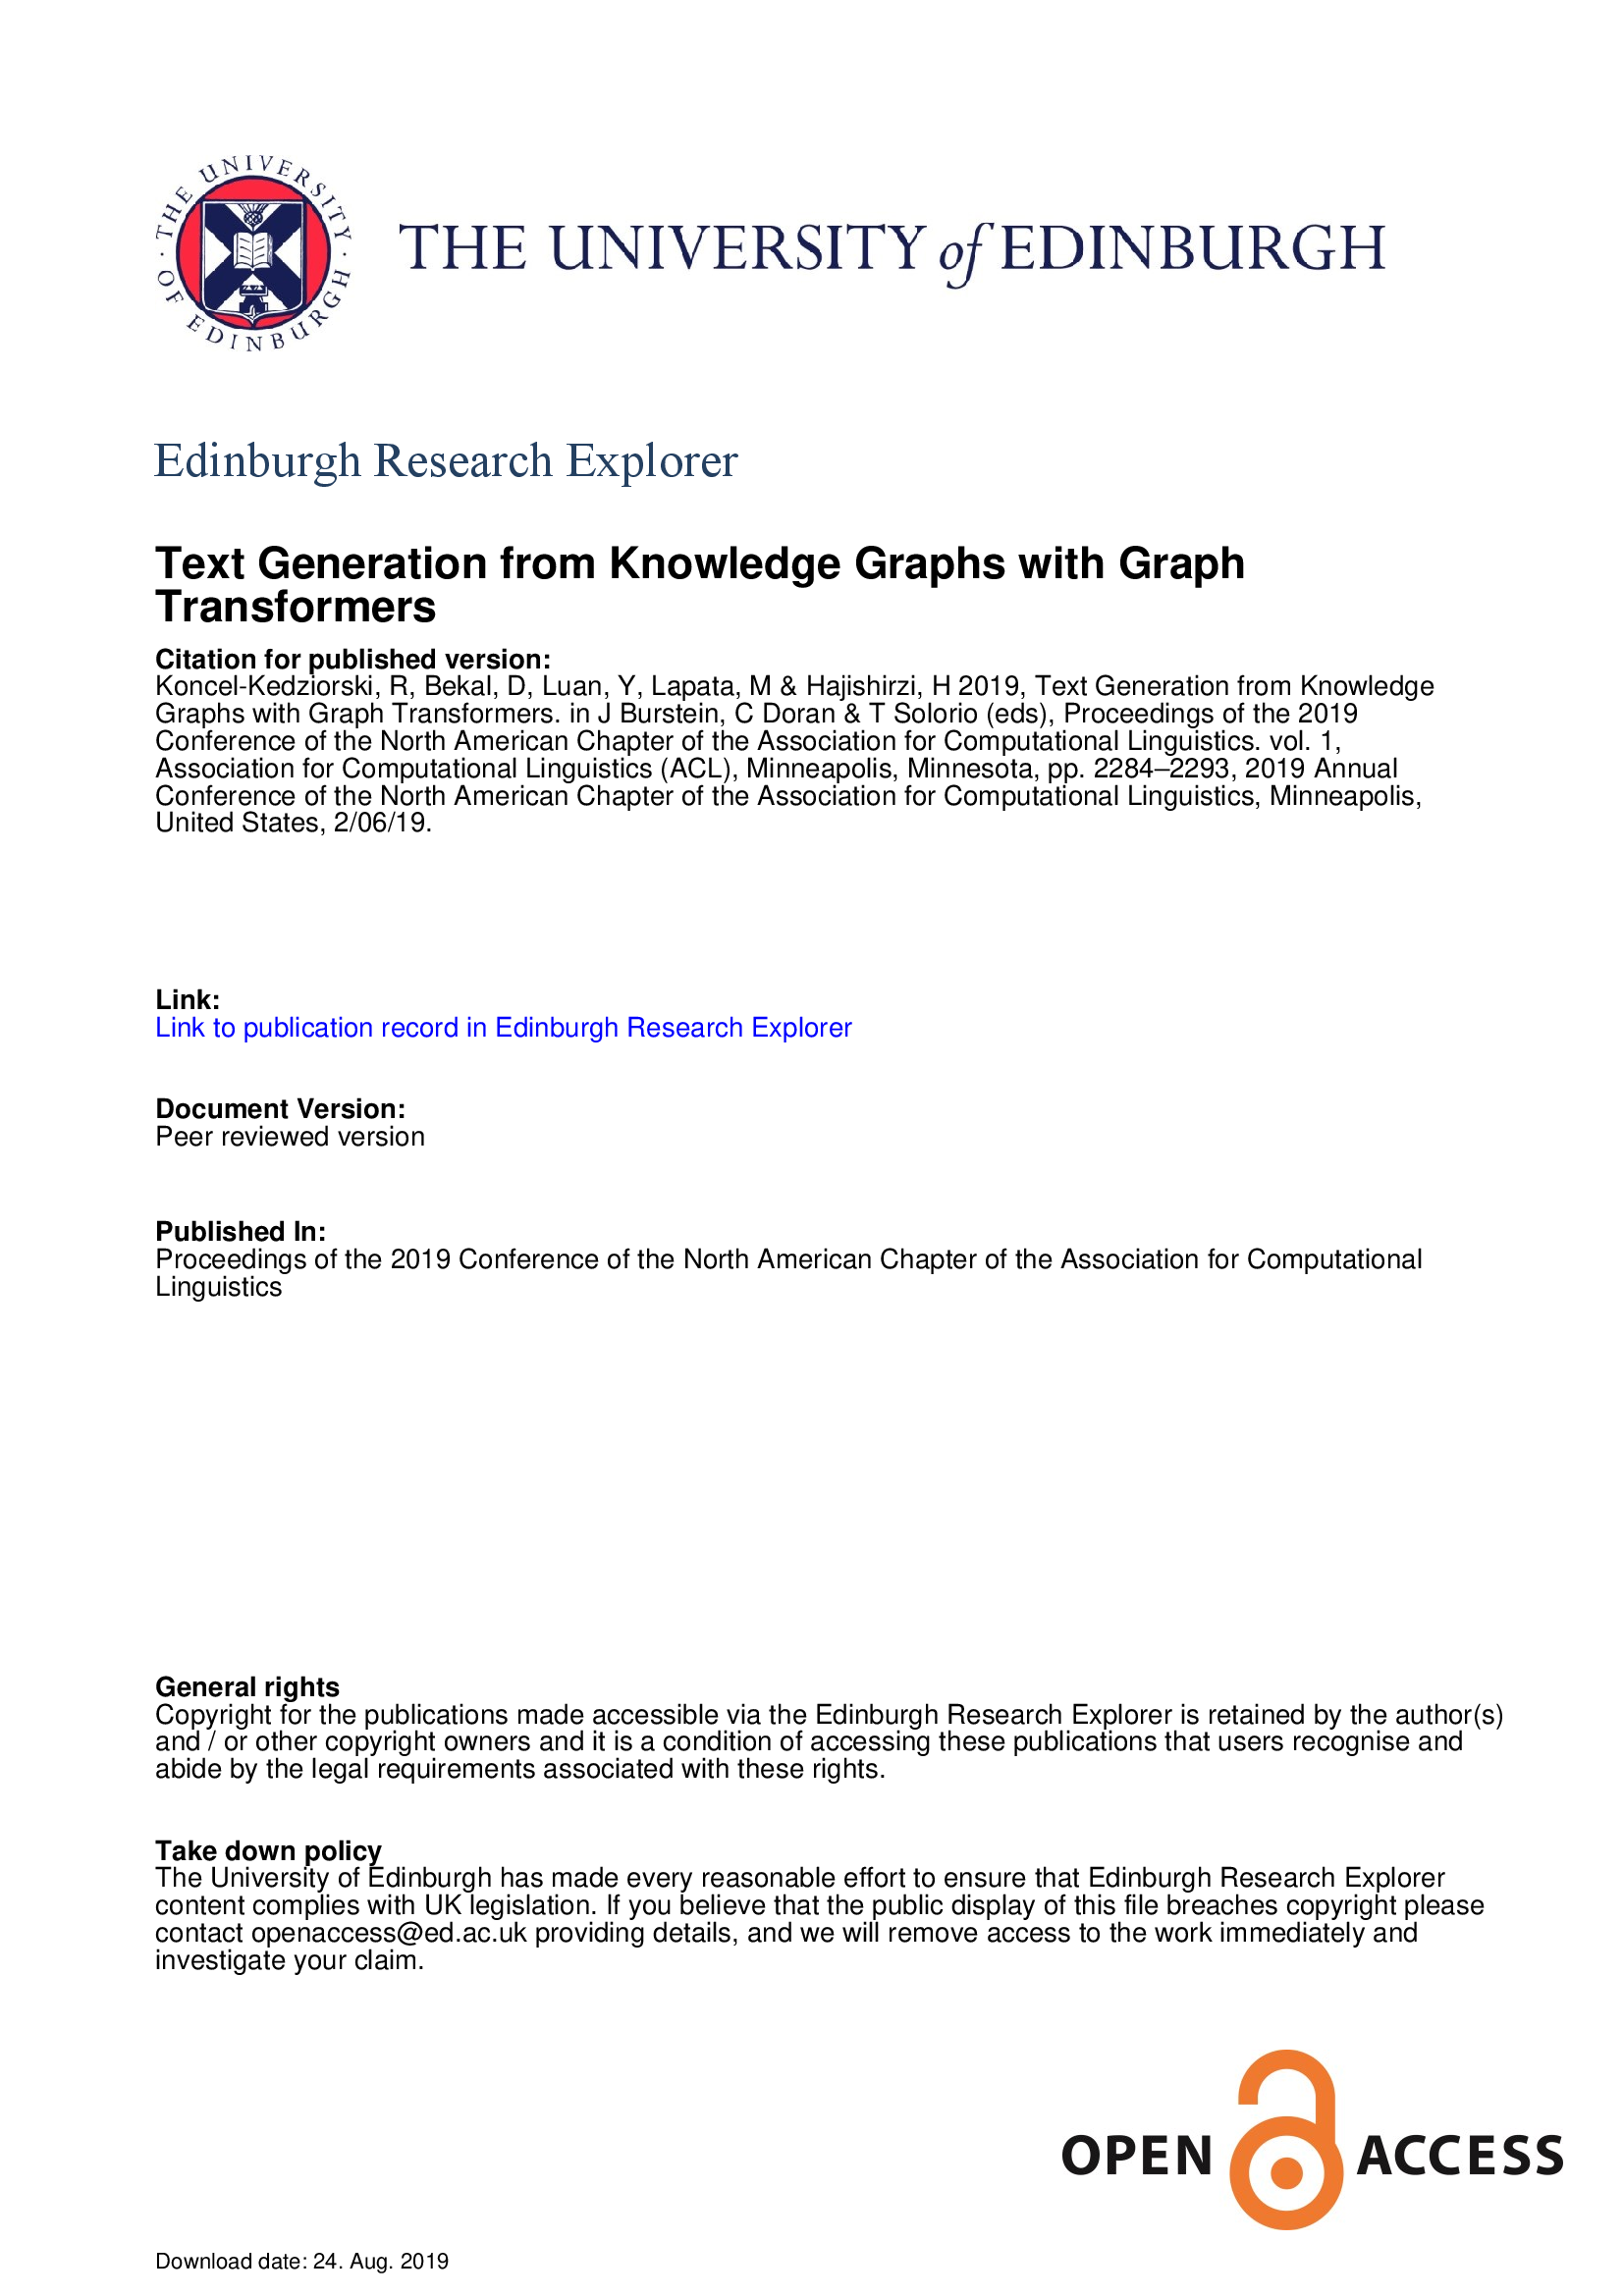 Text Generation from Knowledge Graphs with Graph Transformers